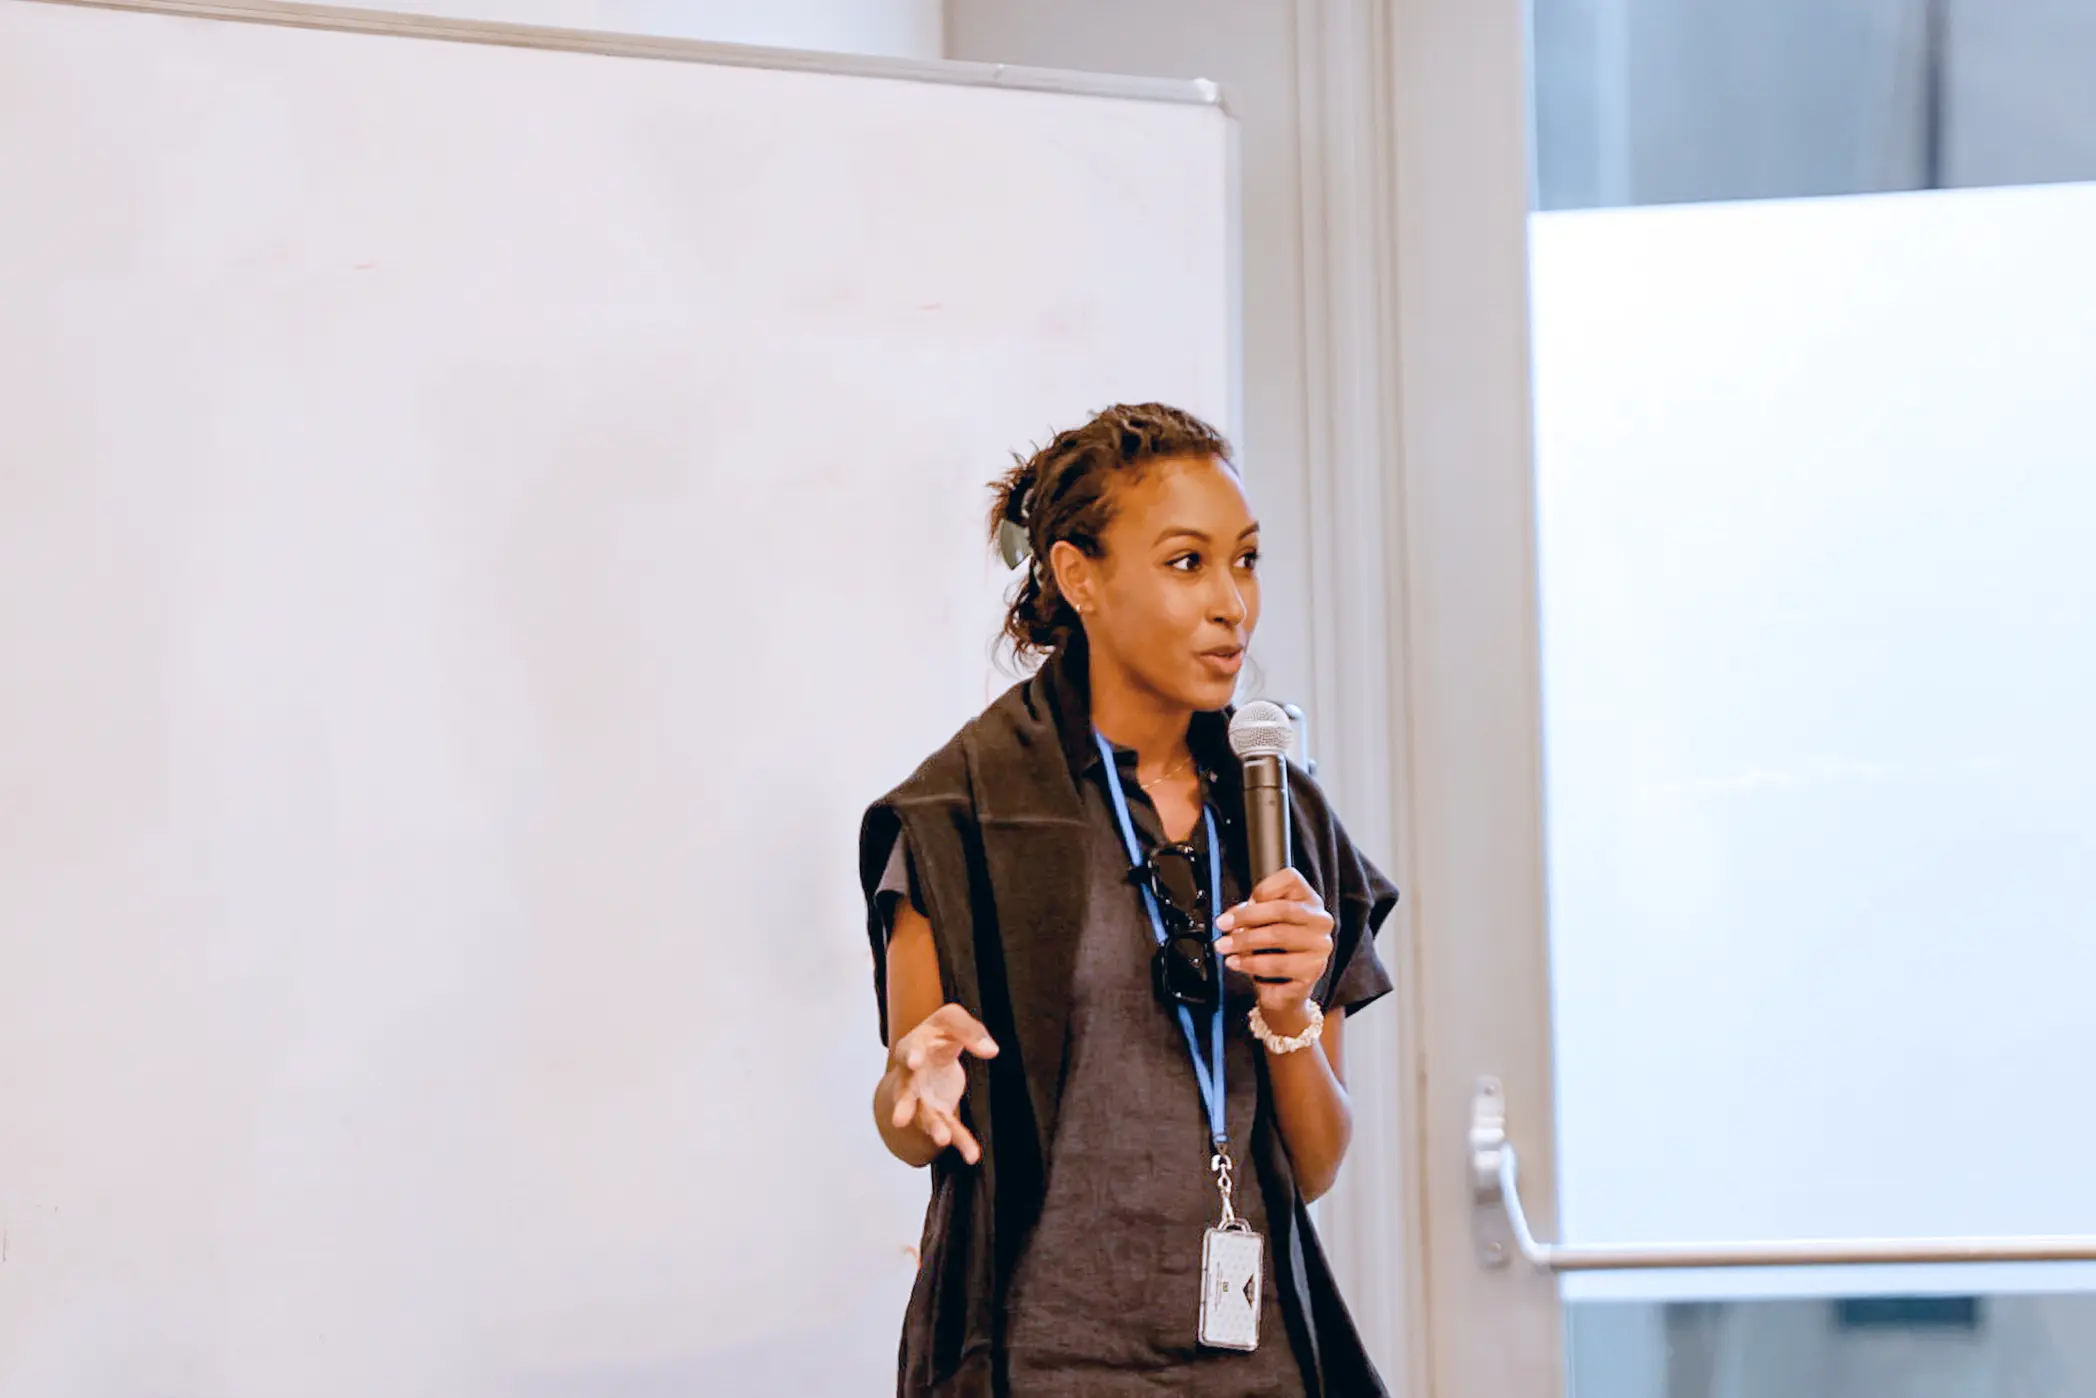 confident young woman speaking at an event